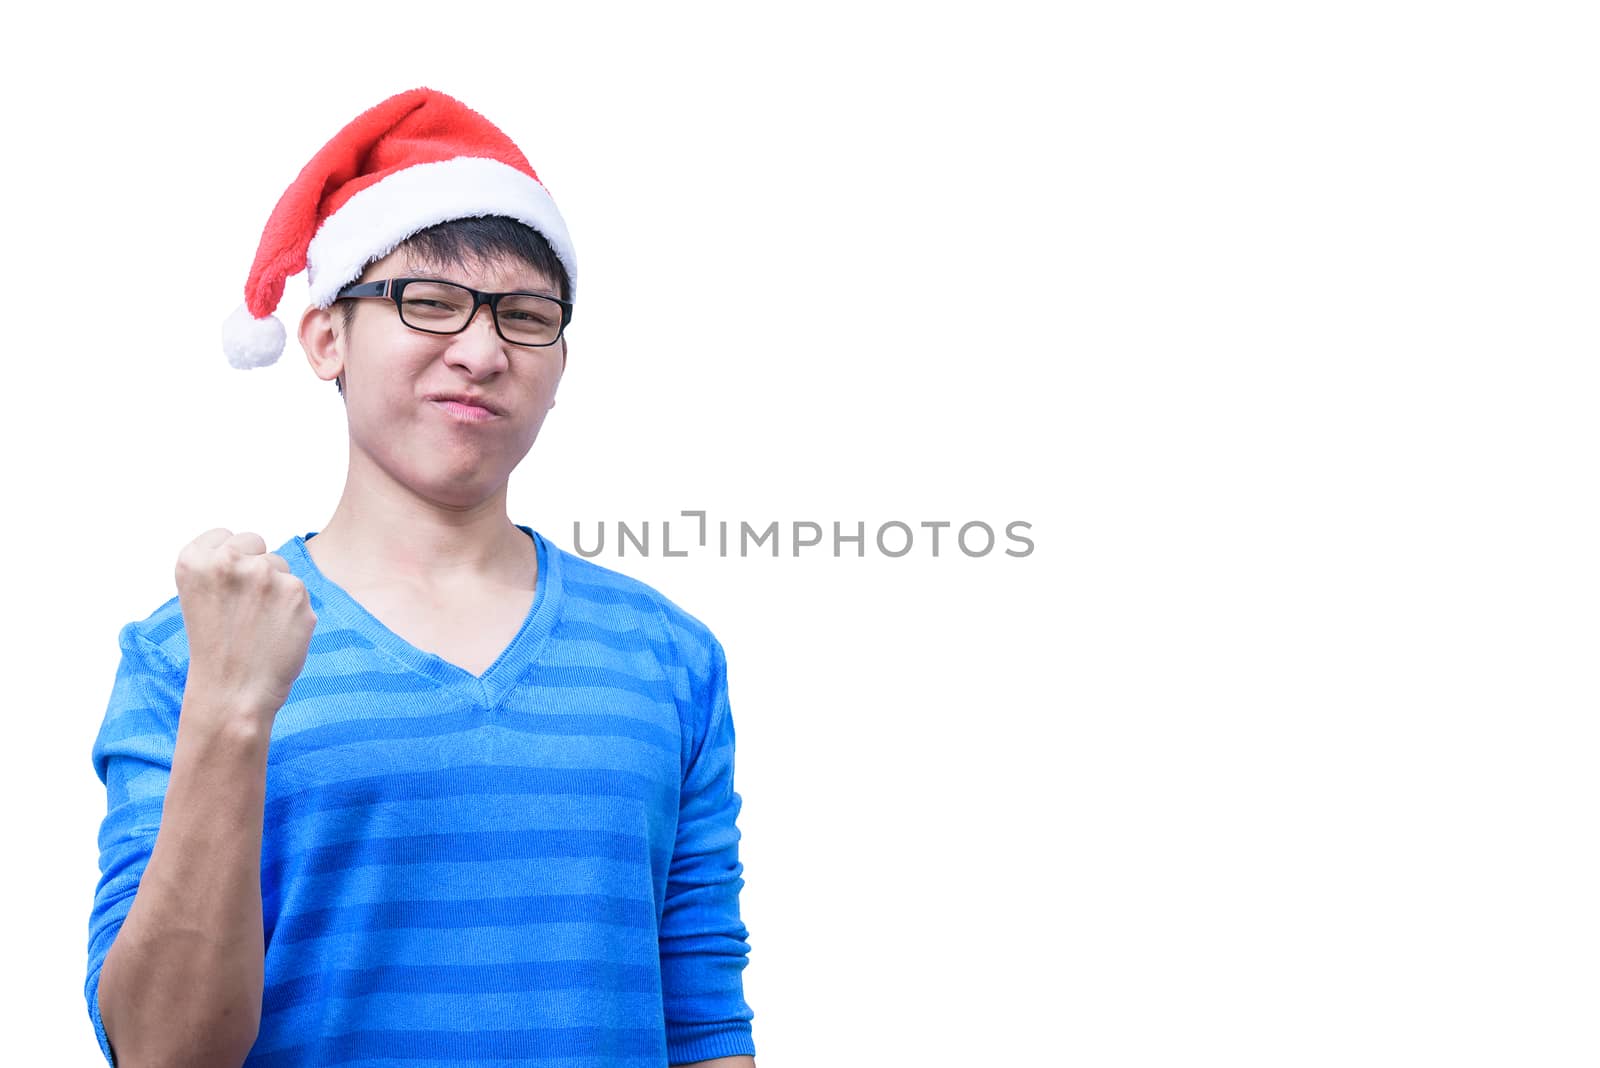 Asian Santa Claus man with eyeglasses and blue shirt has very ha by animagesdesign